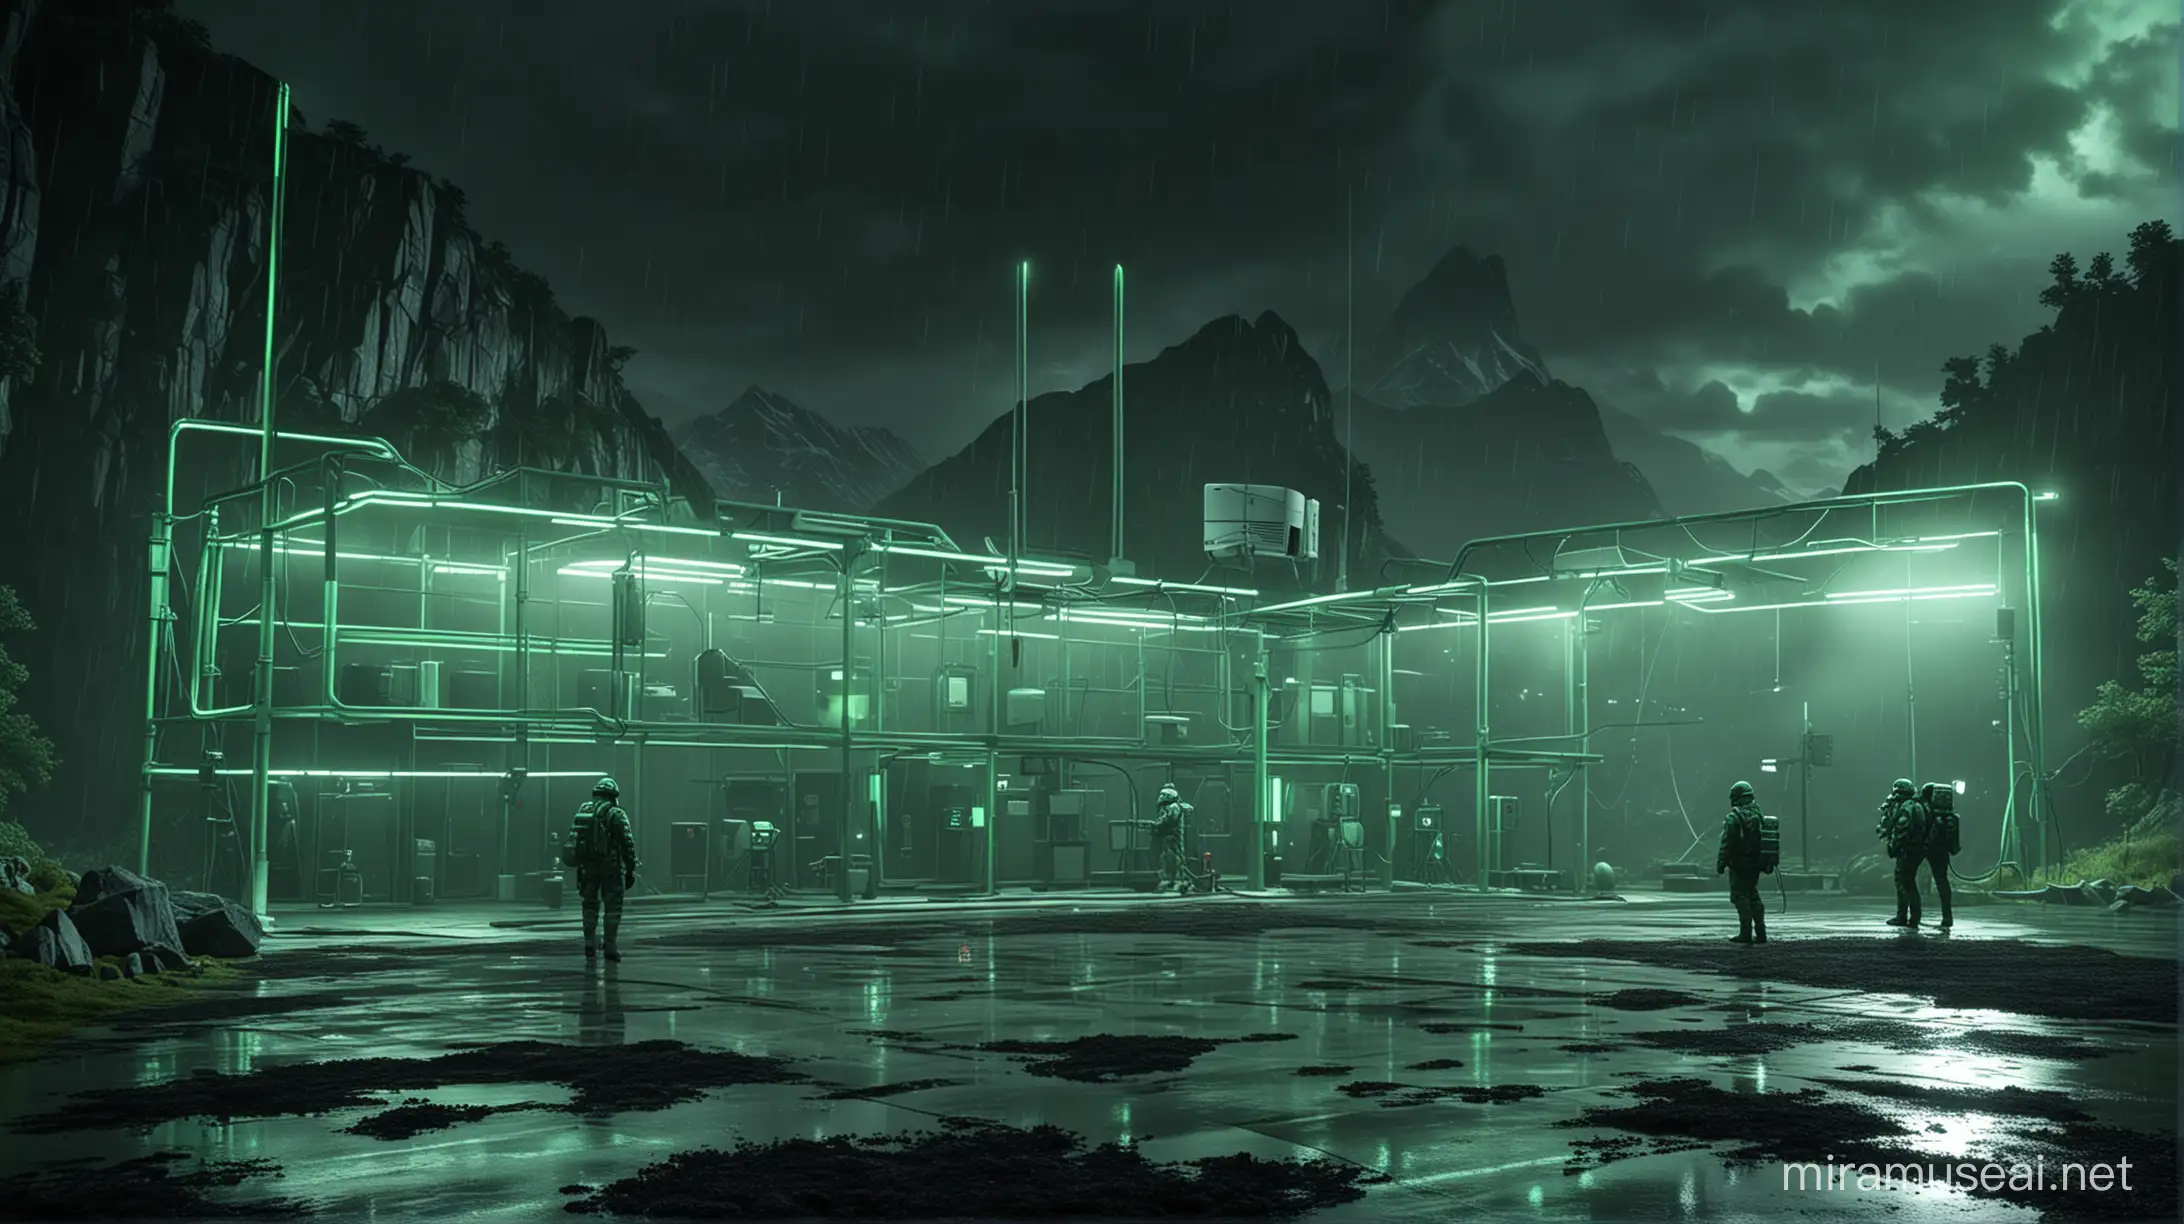 Cinematic Realistic Research Center with Bright Green Neon Lights in Rainy Weather